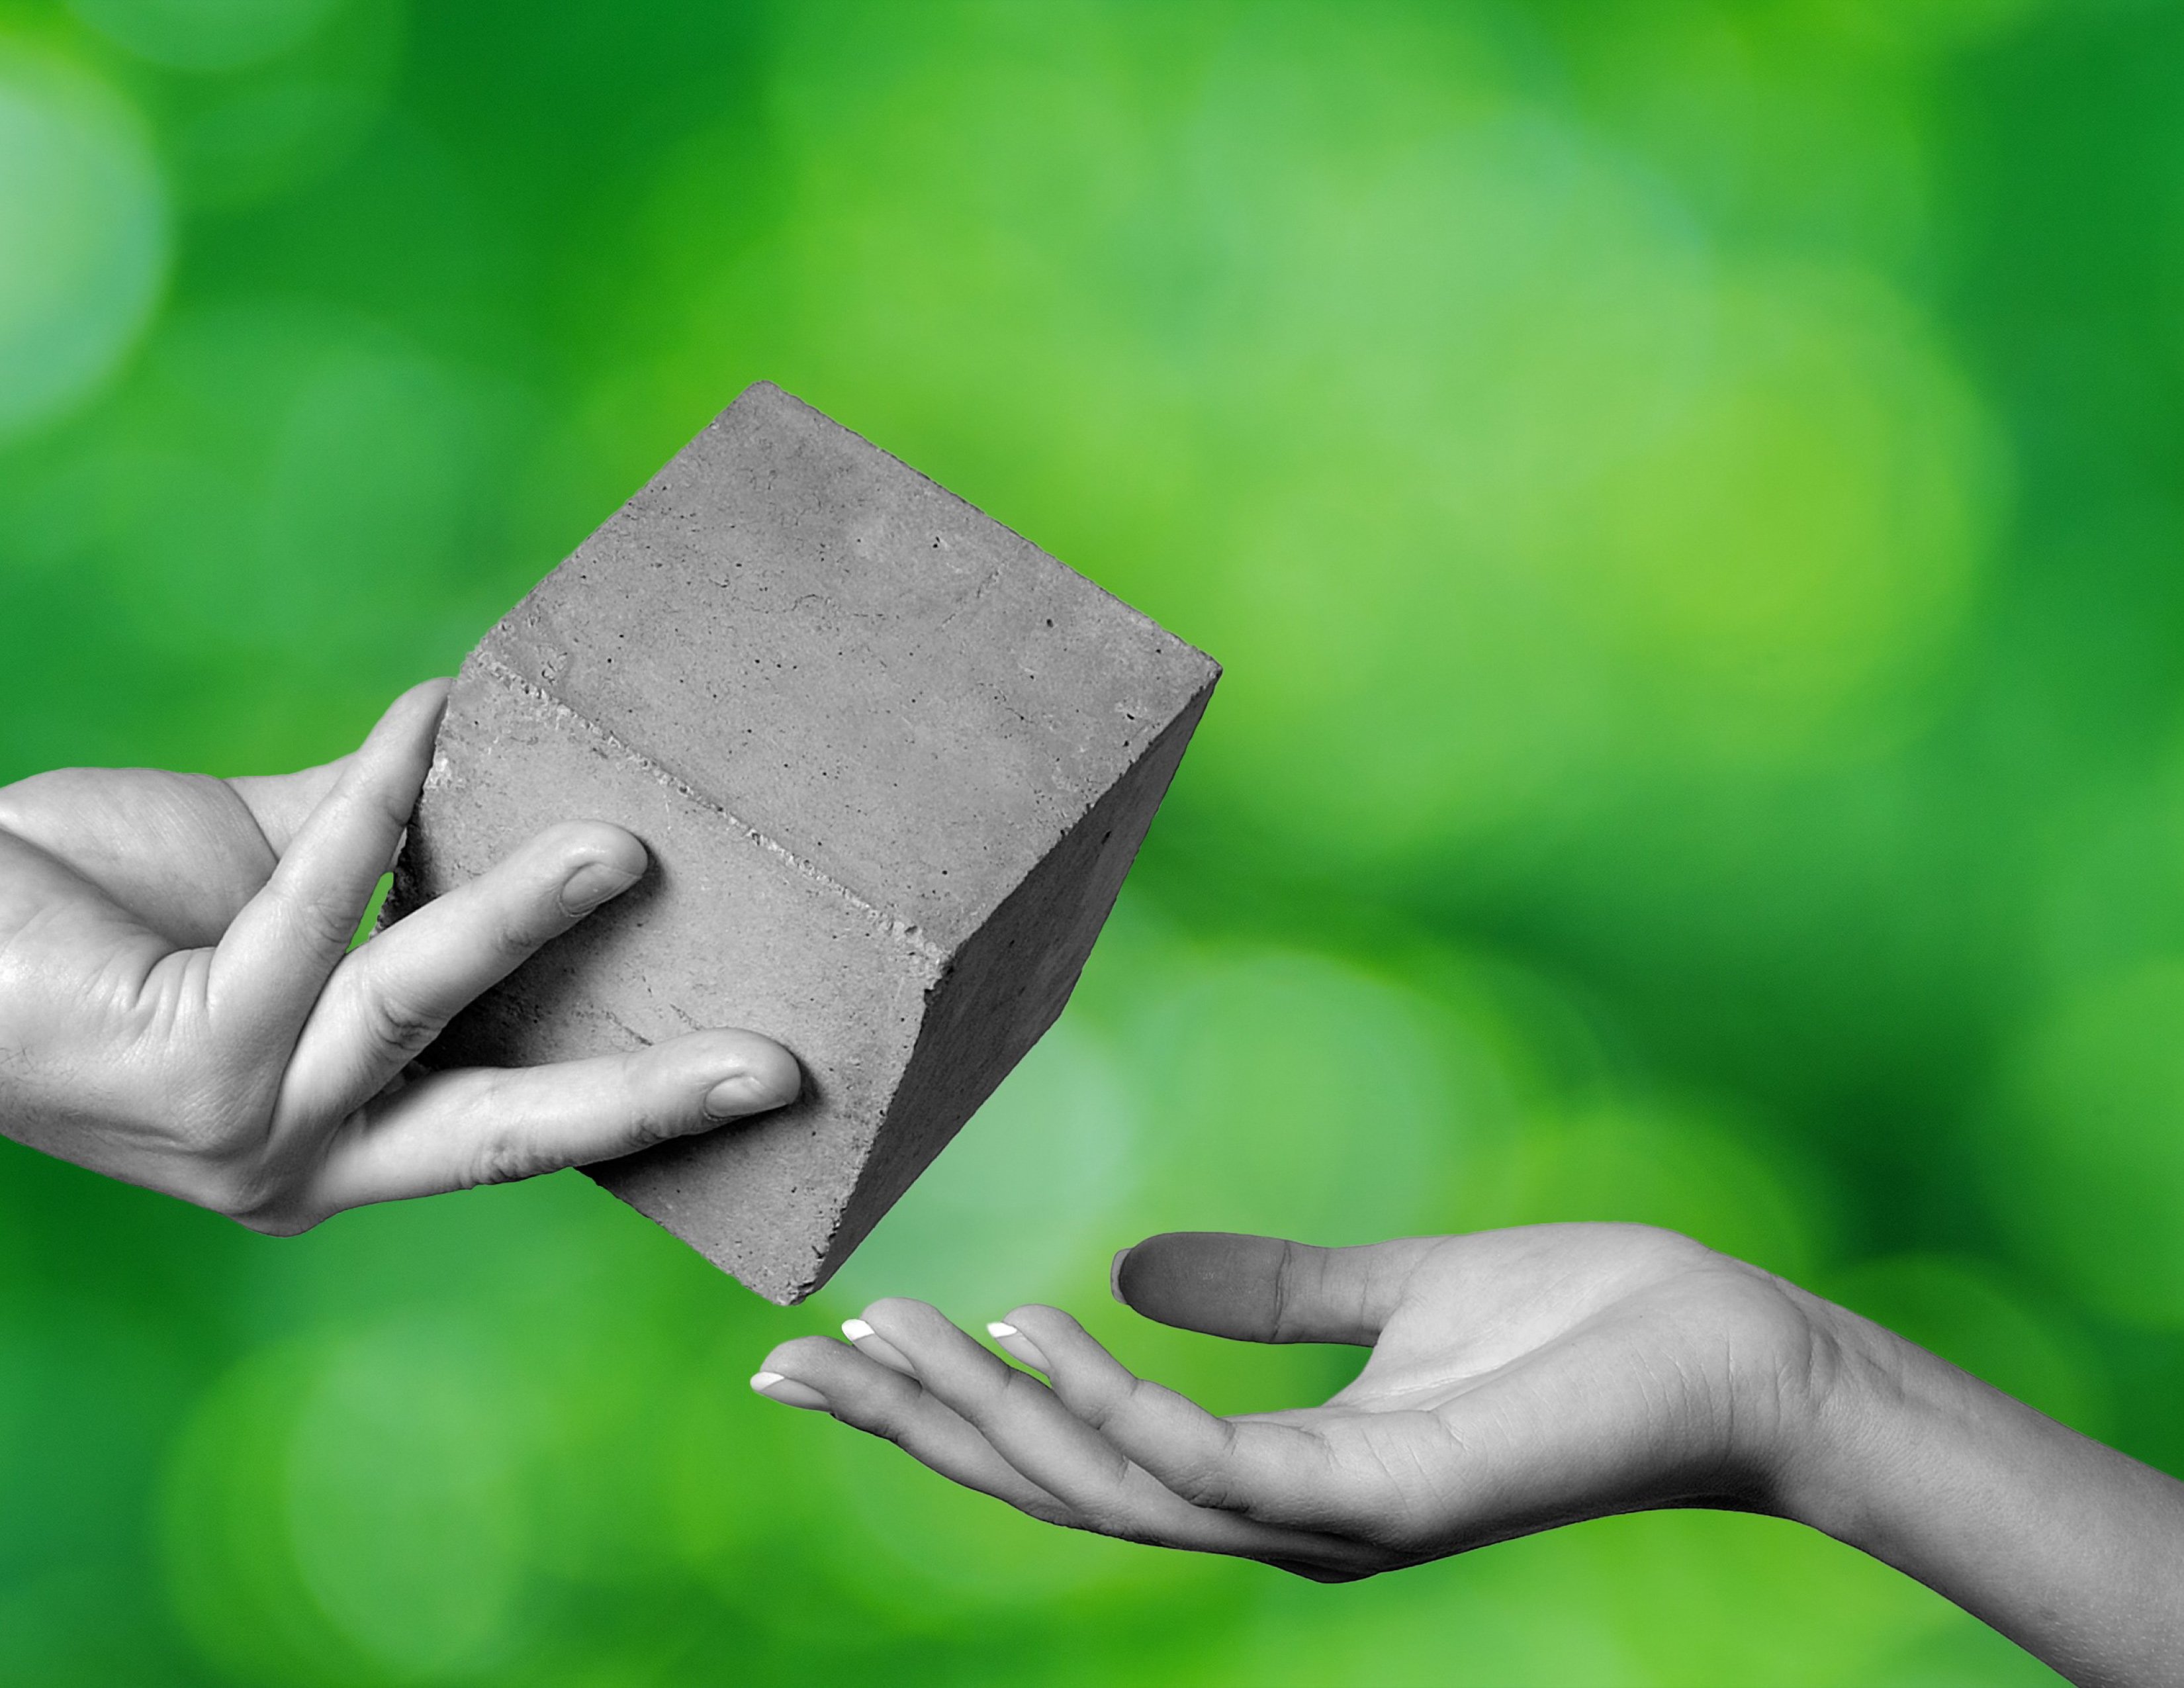 A hand is holding a cubic-formed concrete block giving it to another person